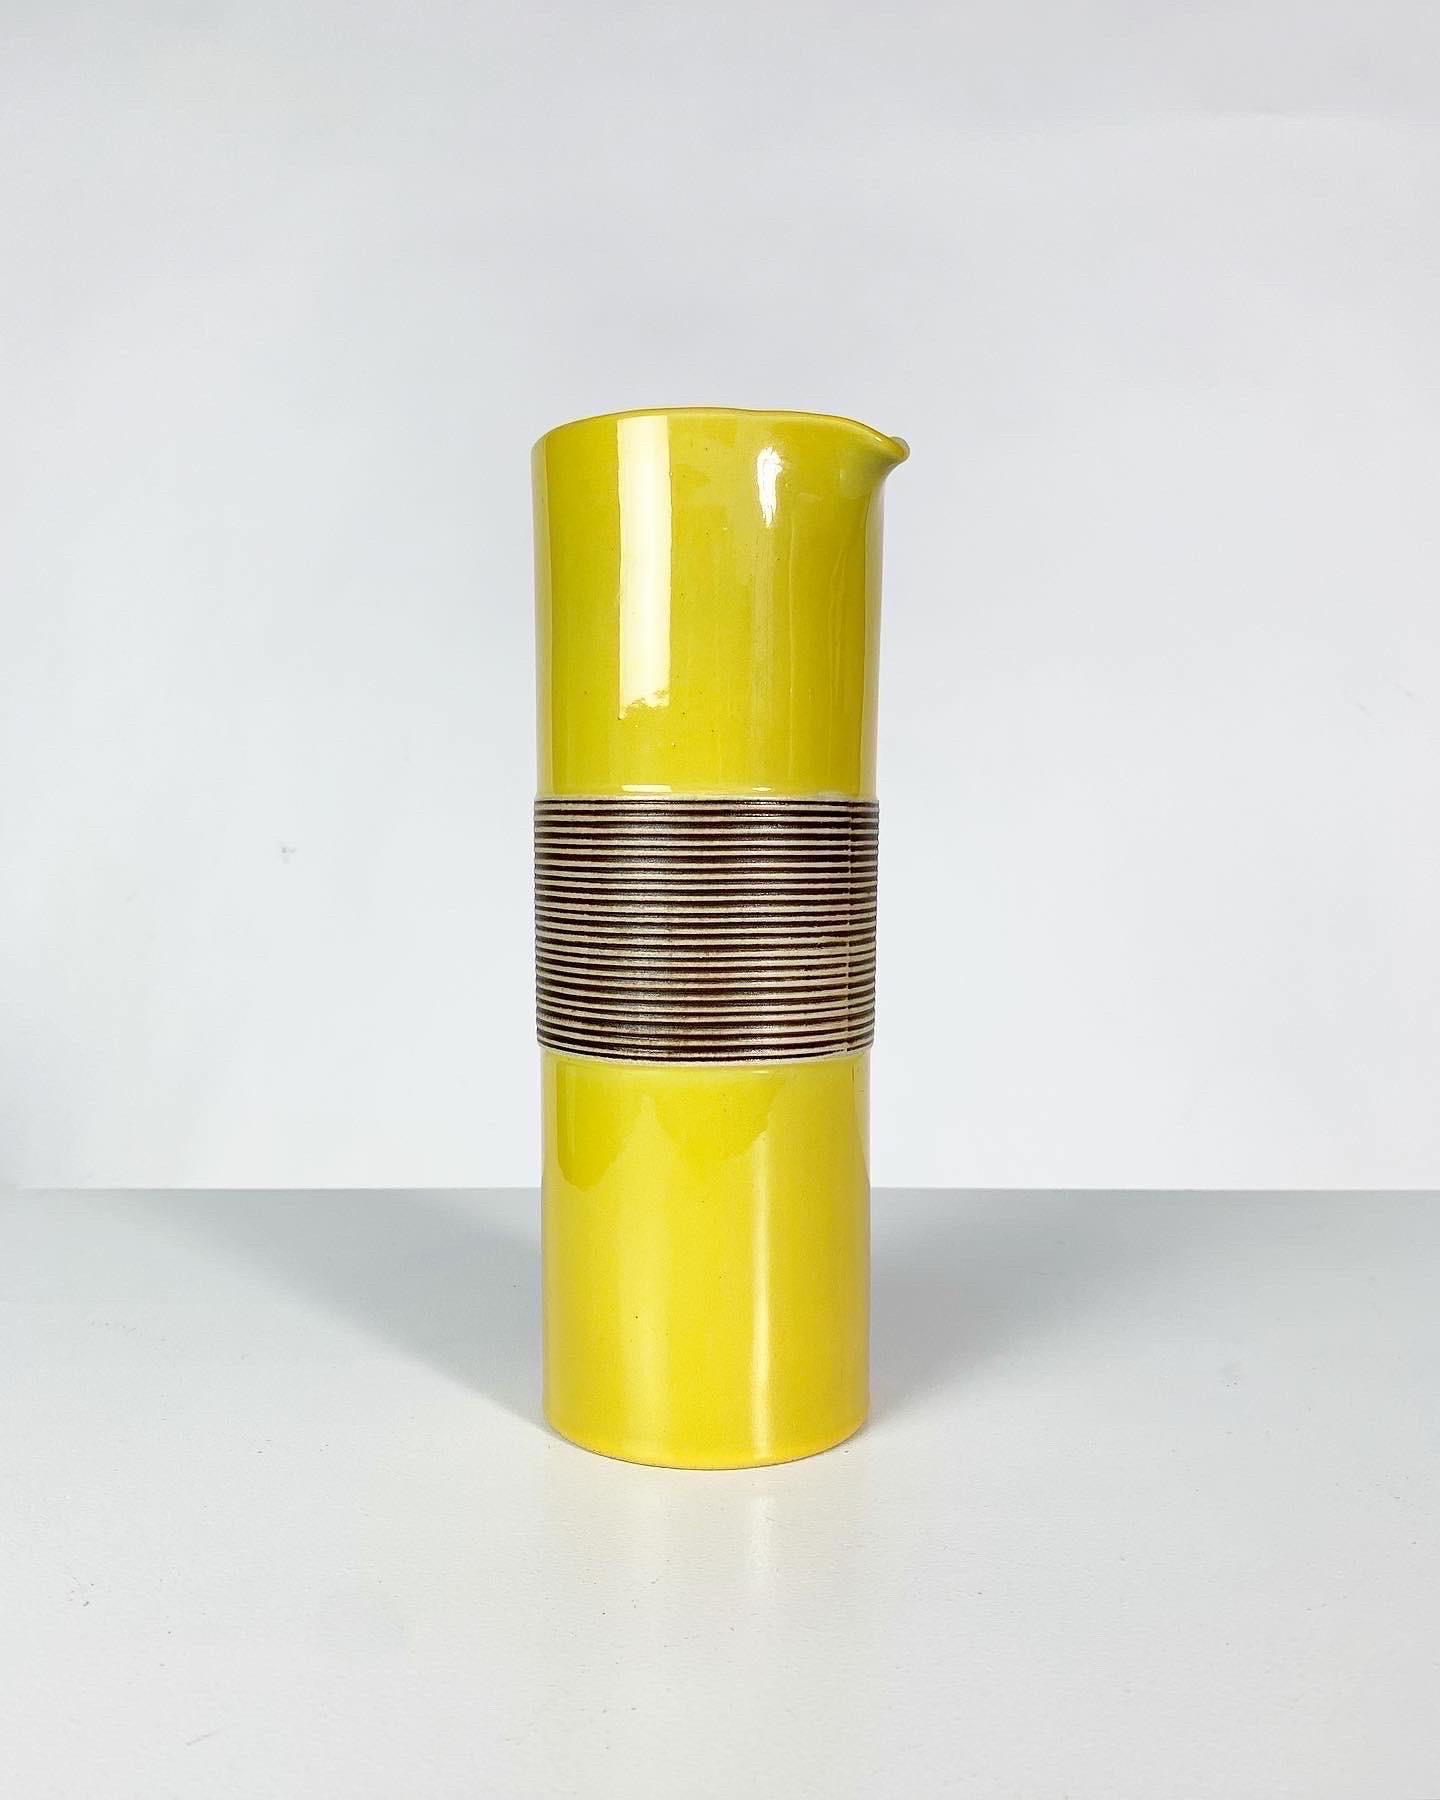 Ceramic carafe designed by Carl Harry Stålhane, „Entré“ series designed in 1957 for Rörstrand in Sweden and produced until 1960.

The series consists of different tableware in unicolor glazes with a carved relief detail, this piece comes in a